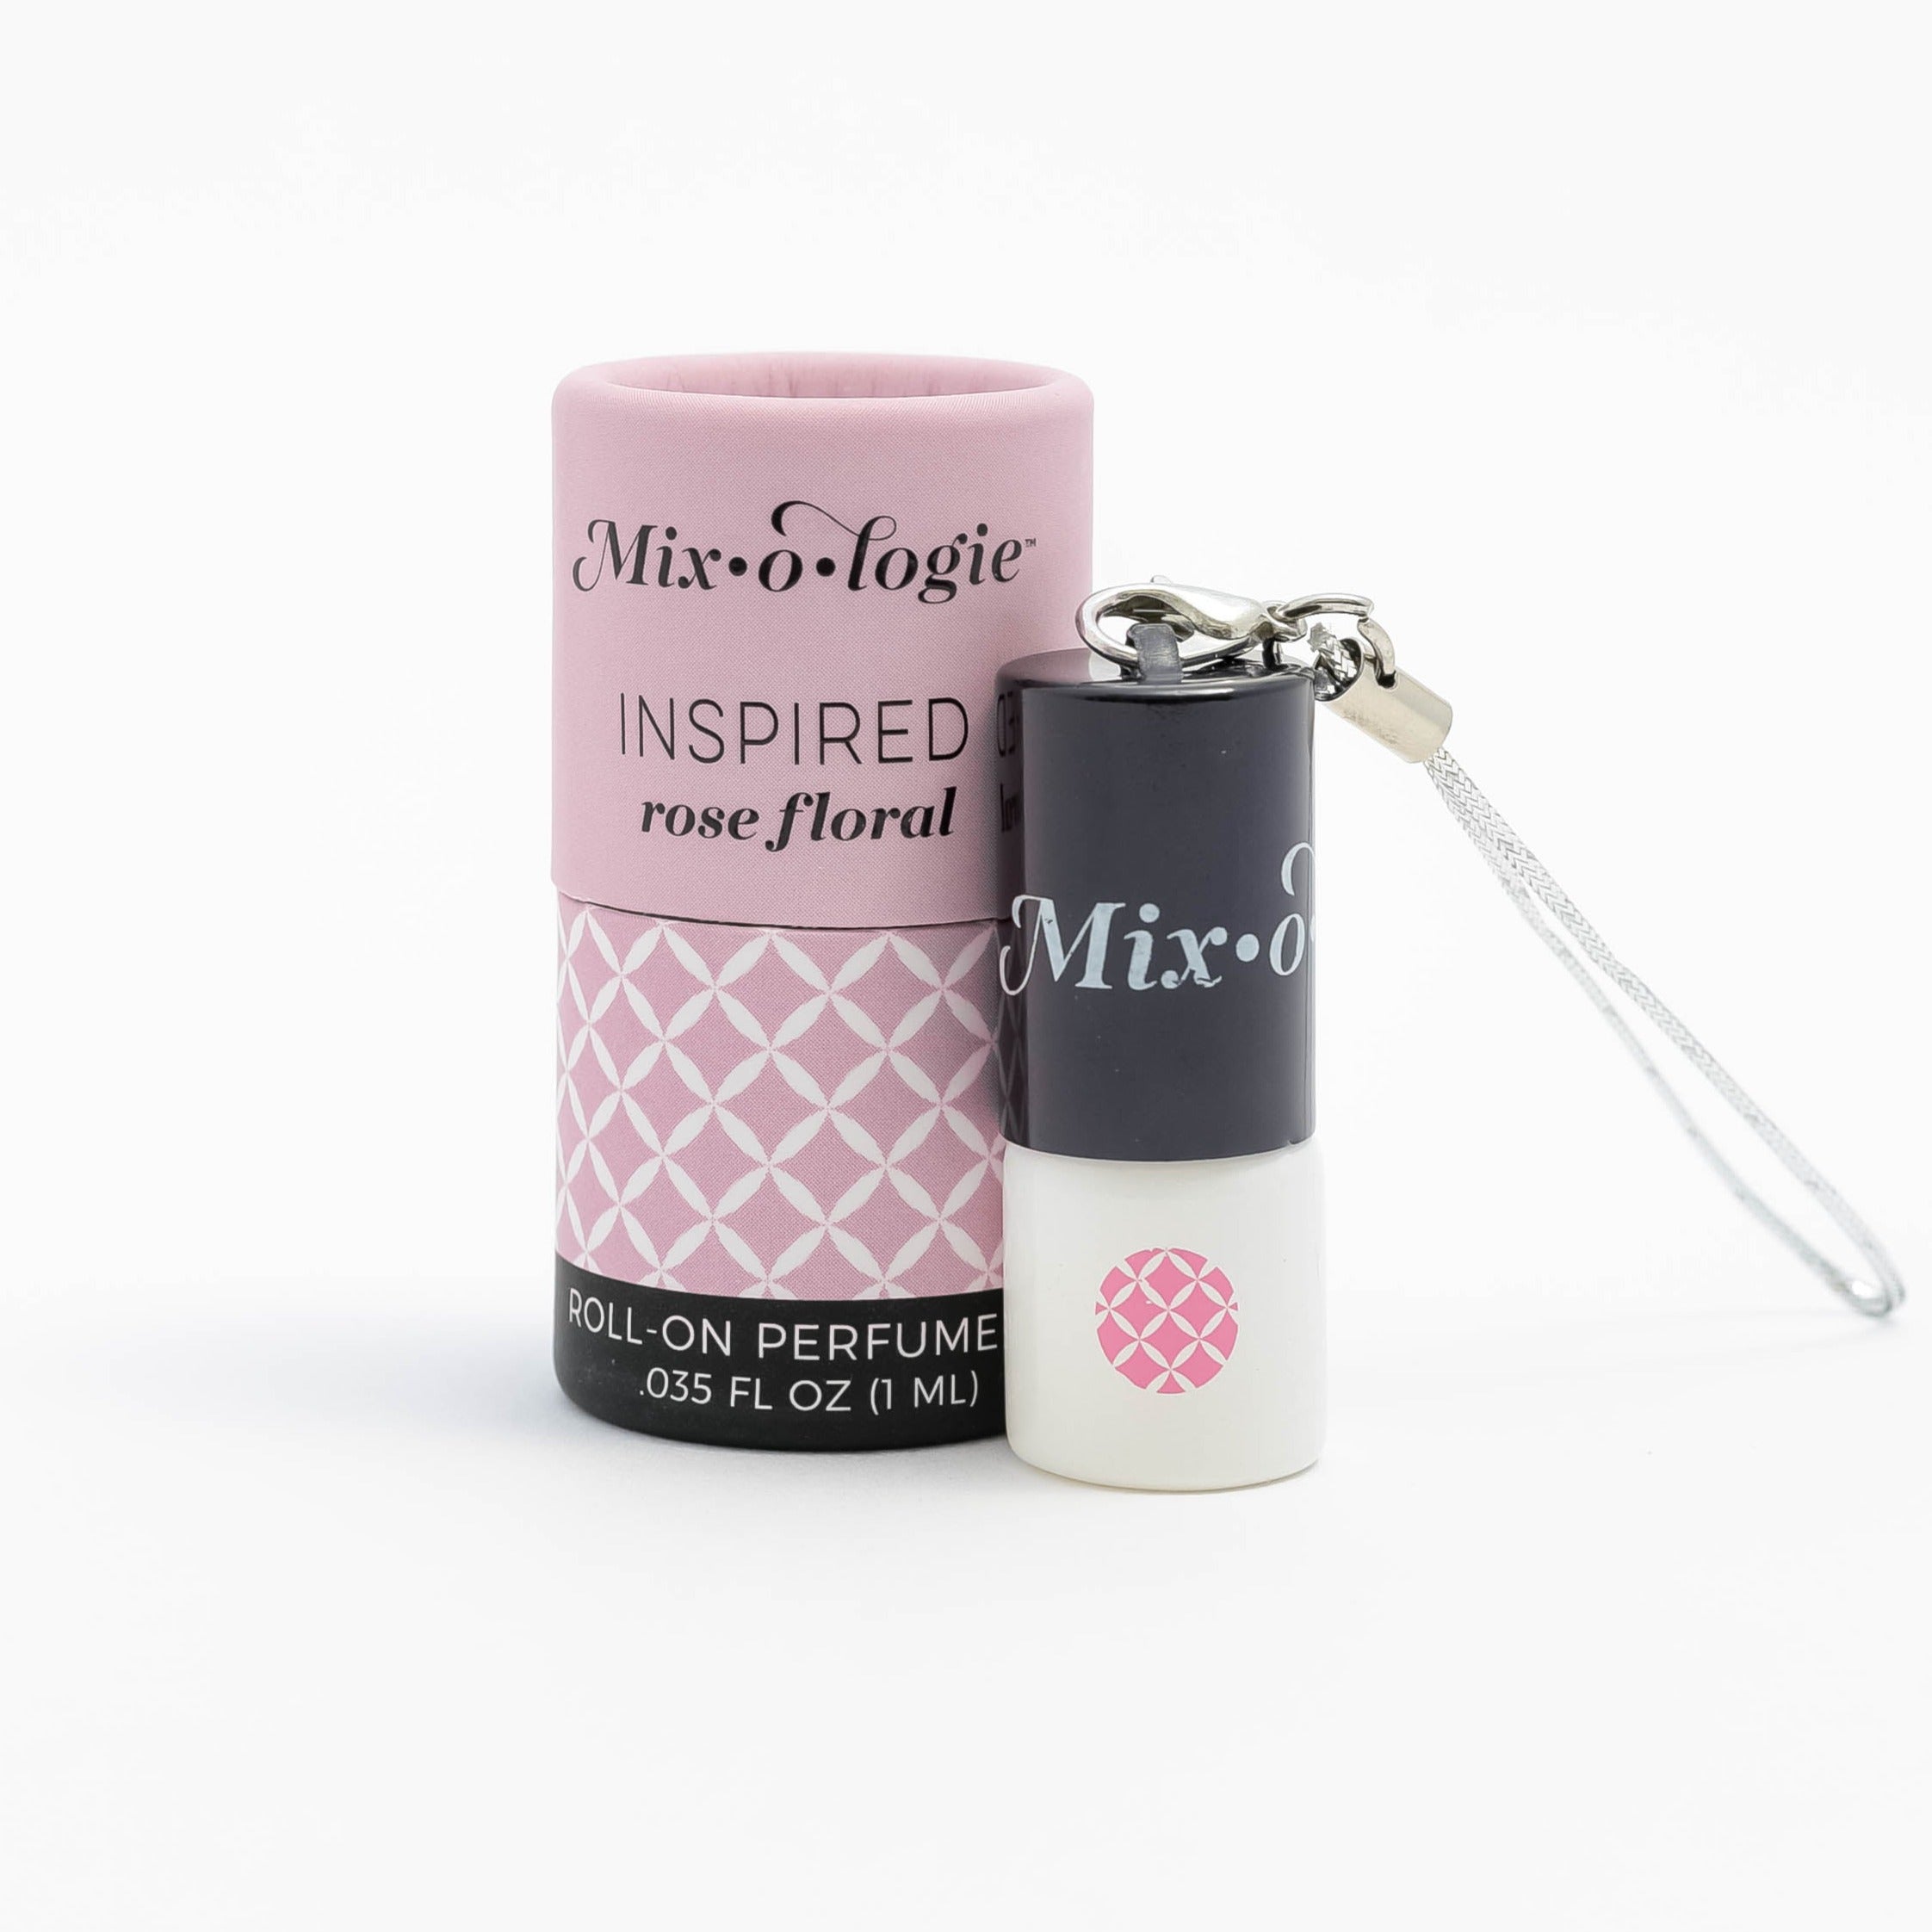 Inspired (Rose Floral) mini white cylinder rollerballs with black top and keychain attachment with pale pink diamond-like pattern and has .035 fl oz or 1 mL. Pale pink cylinder packing tube with pale pink wave-like pattern. Roll-on perfume oil. Mini rollerball and cylinder tube are on a white background.